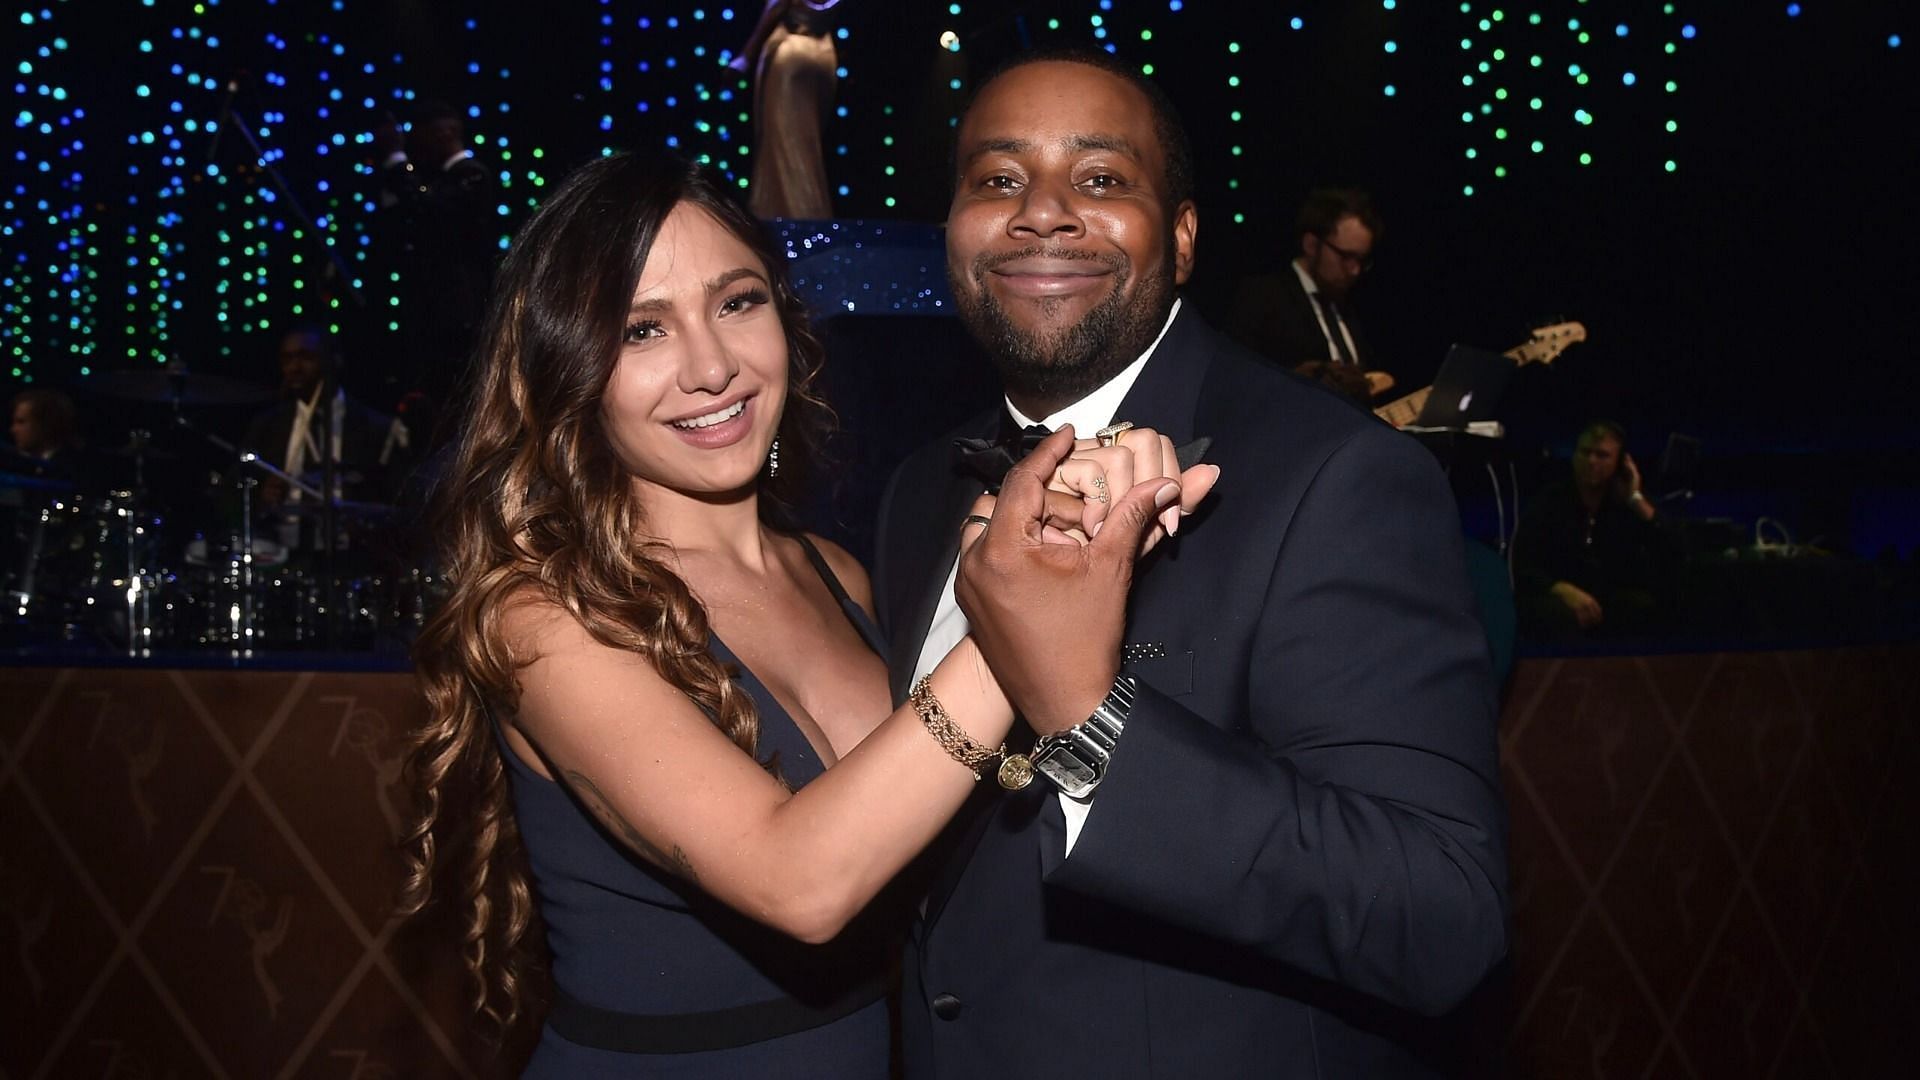 Kenan Thompson and Christina Evangeline were married for 11 years (Image via Alberto E. Rodriguez/Getty Images)